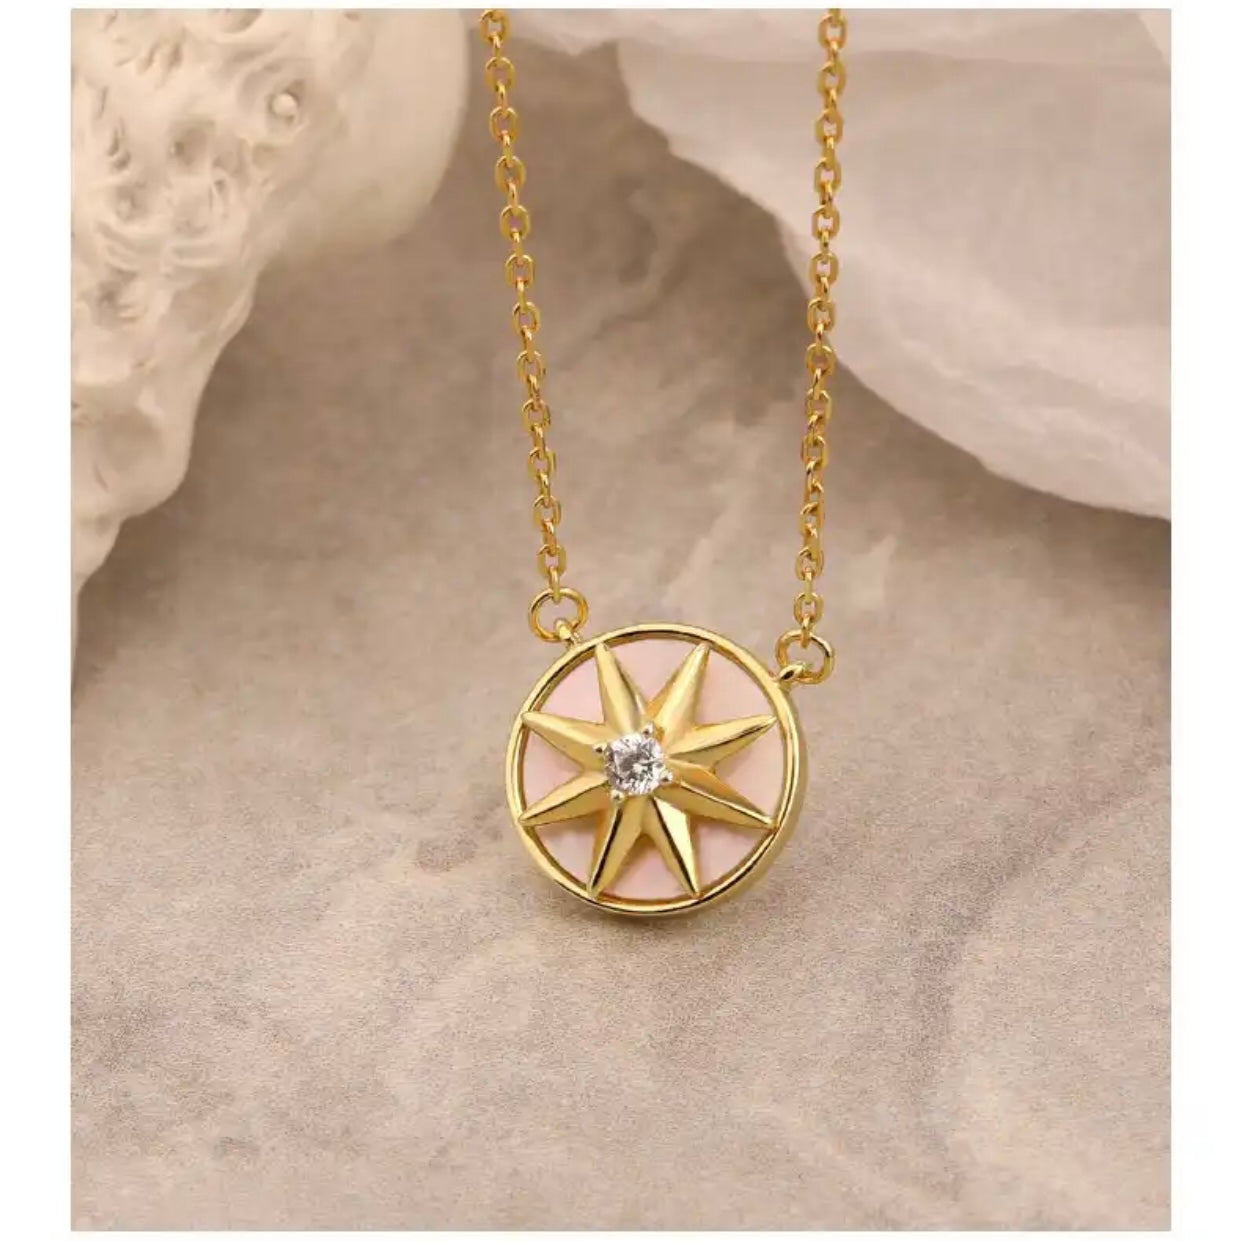 LYA STERLING SILVER NAUTICAL NECKLACE